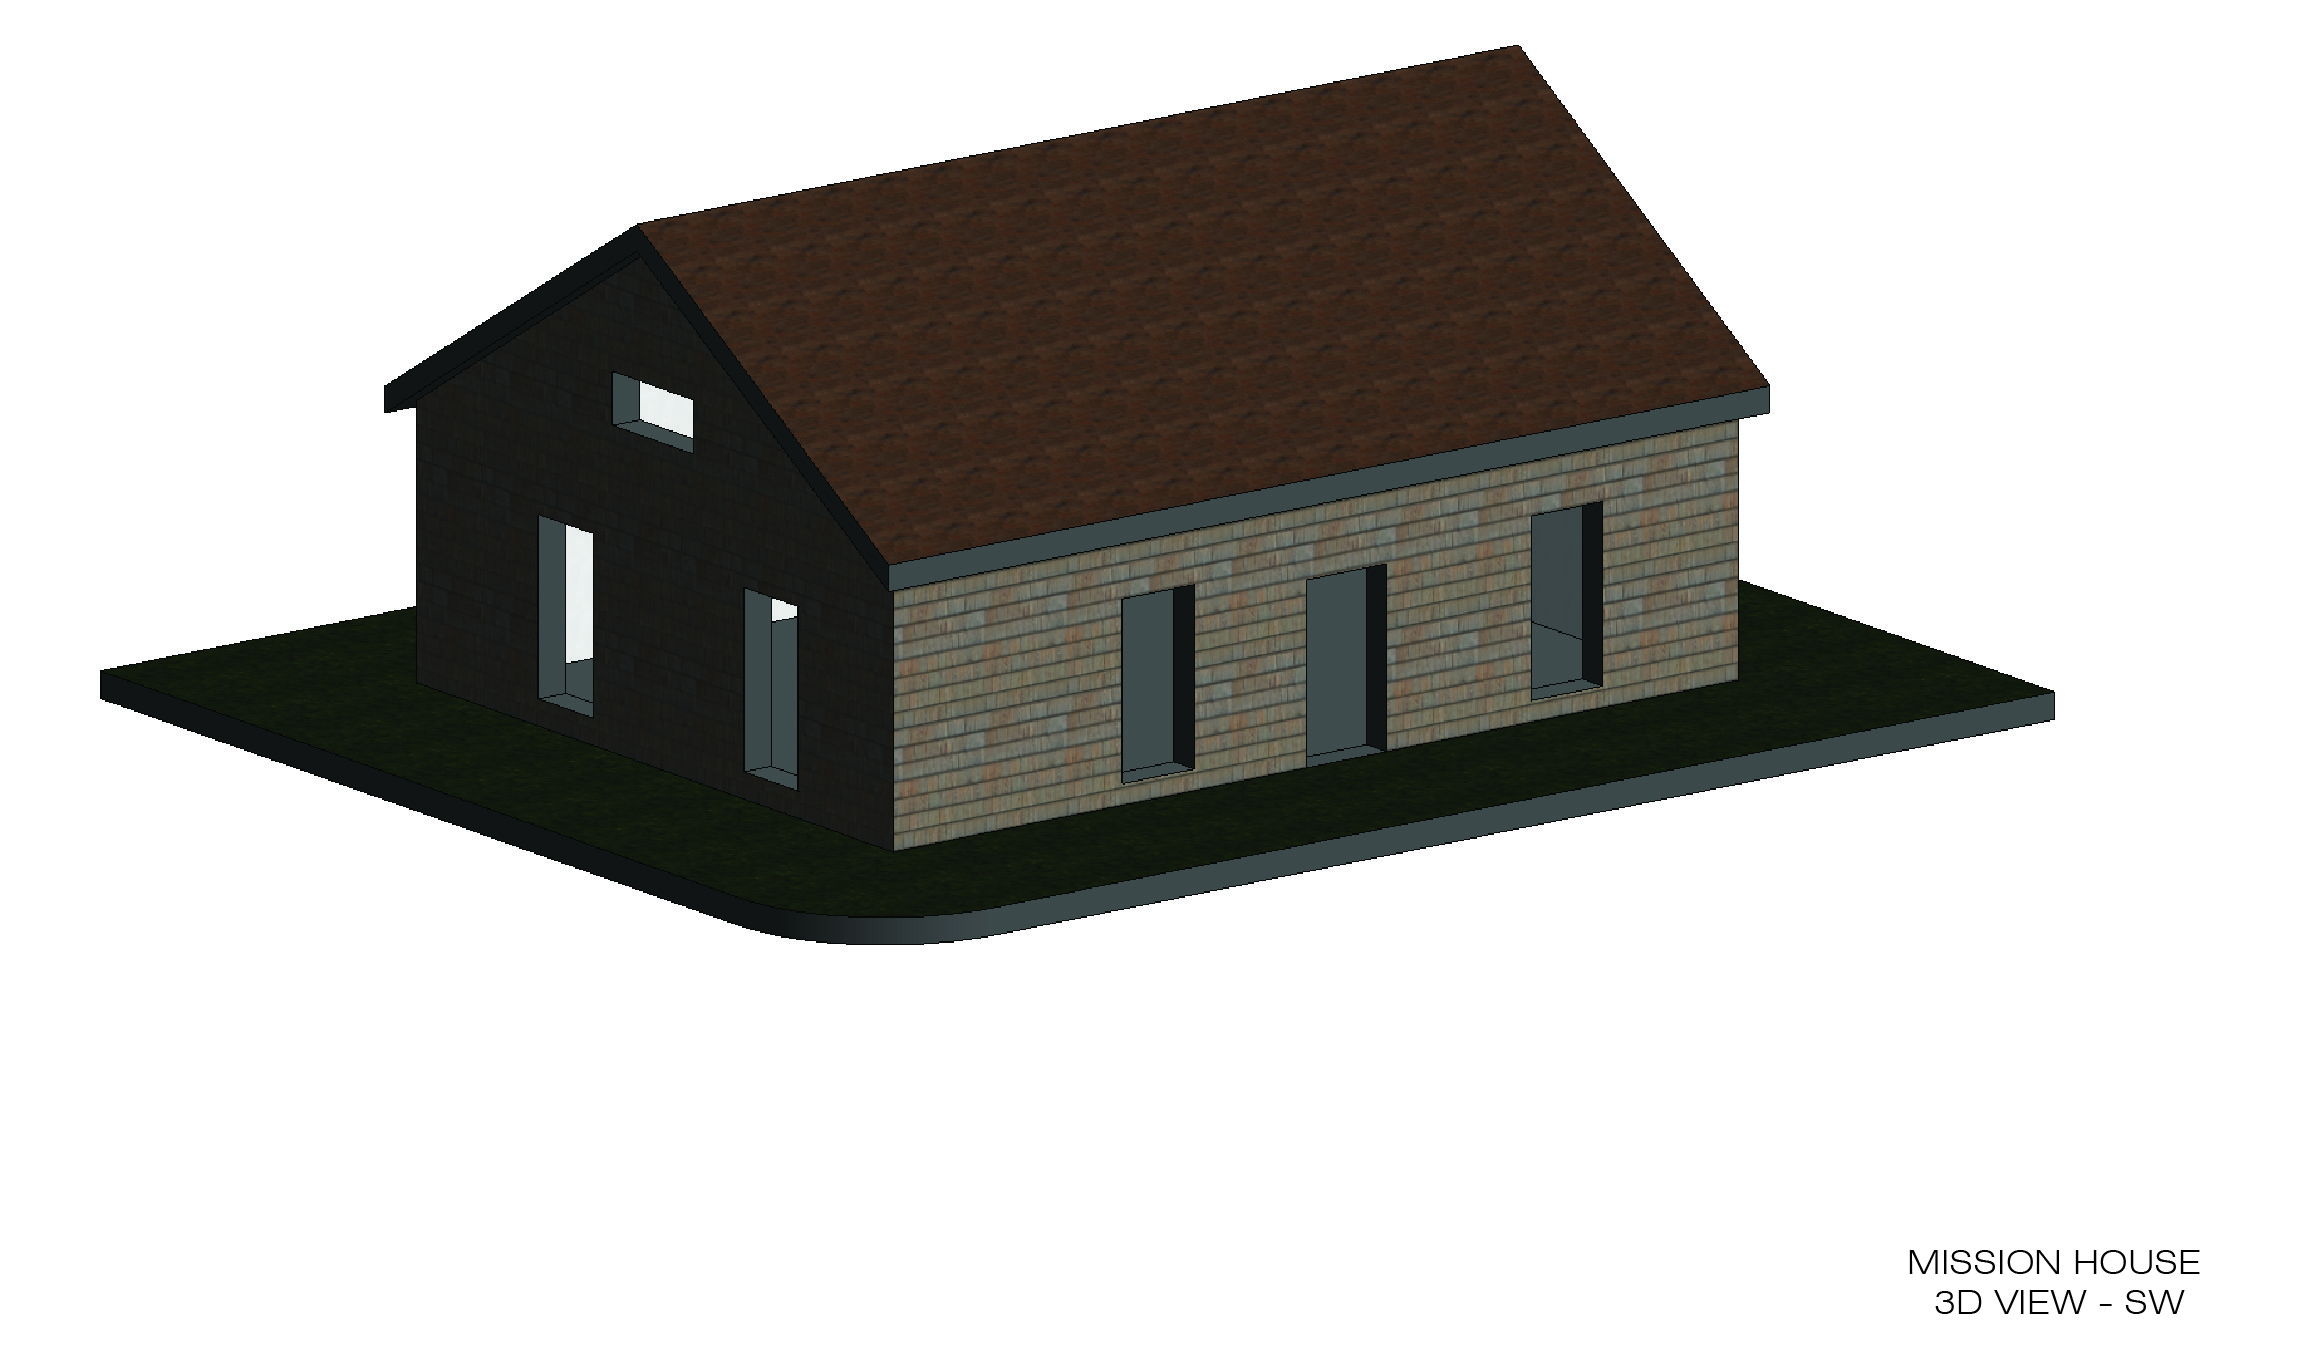 3D view of the Anglican Mission House